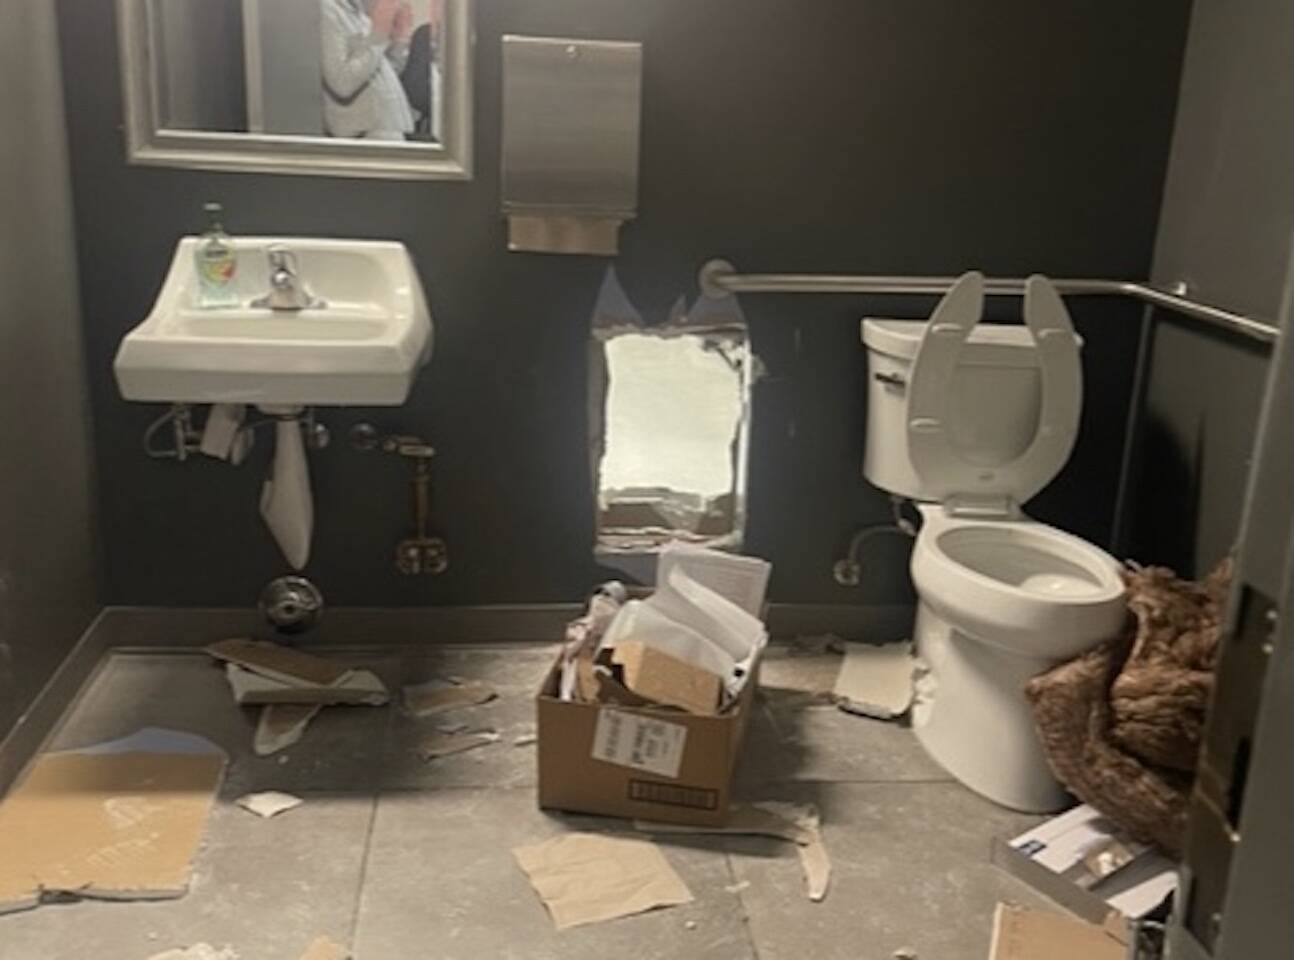 Bandits reportedly cut a hole through Seattle Coffee Gear’s bathroom wall to access the Alderwood mall Apple store, on Sunday, April 2, 2023, in Lynnwood, Washington. (Photo courtesy Mike Atkinson)